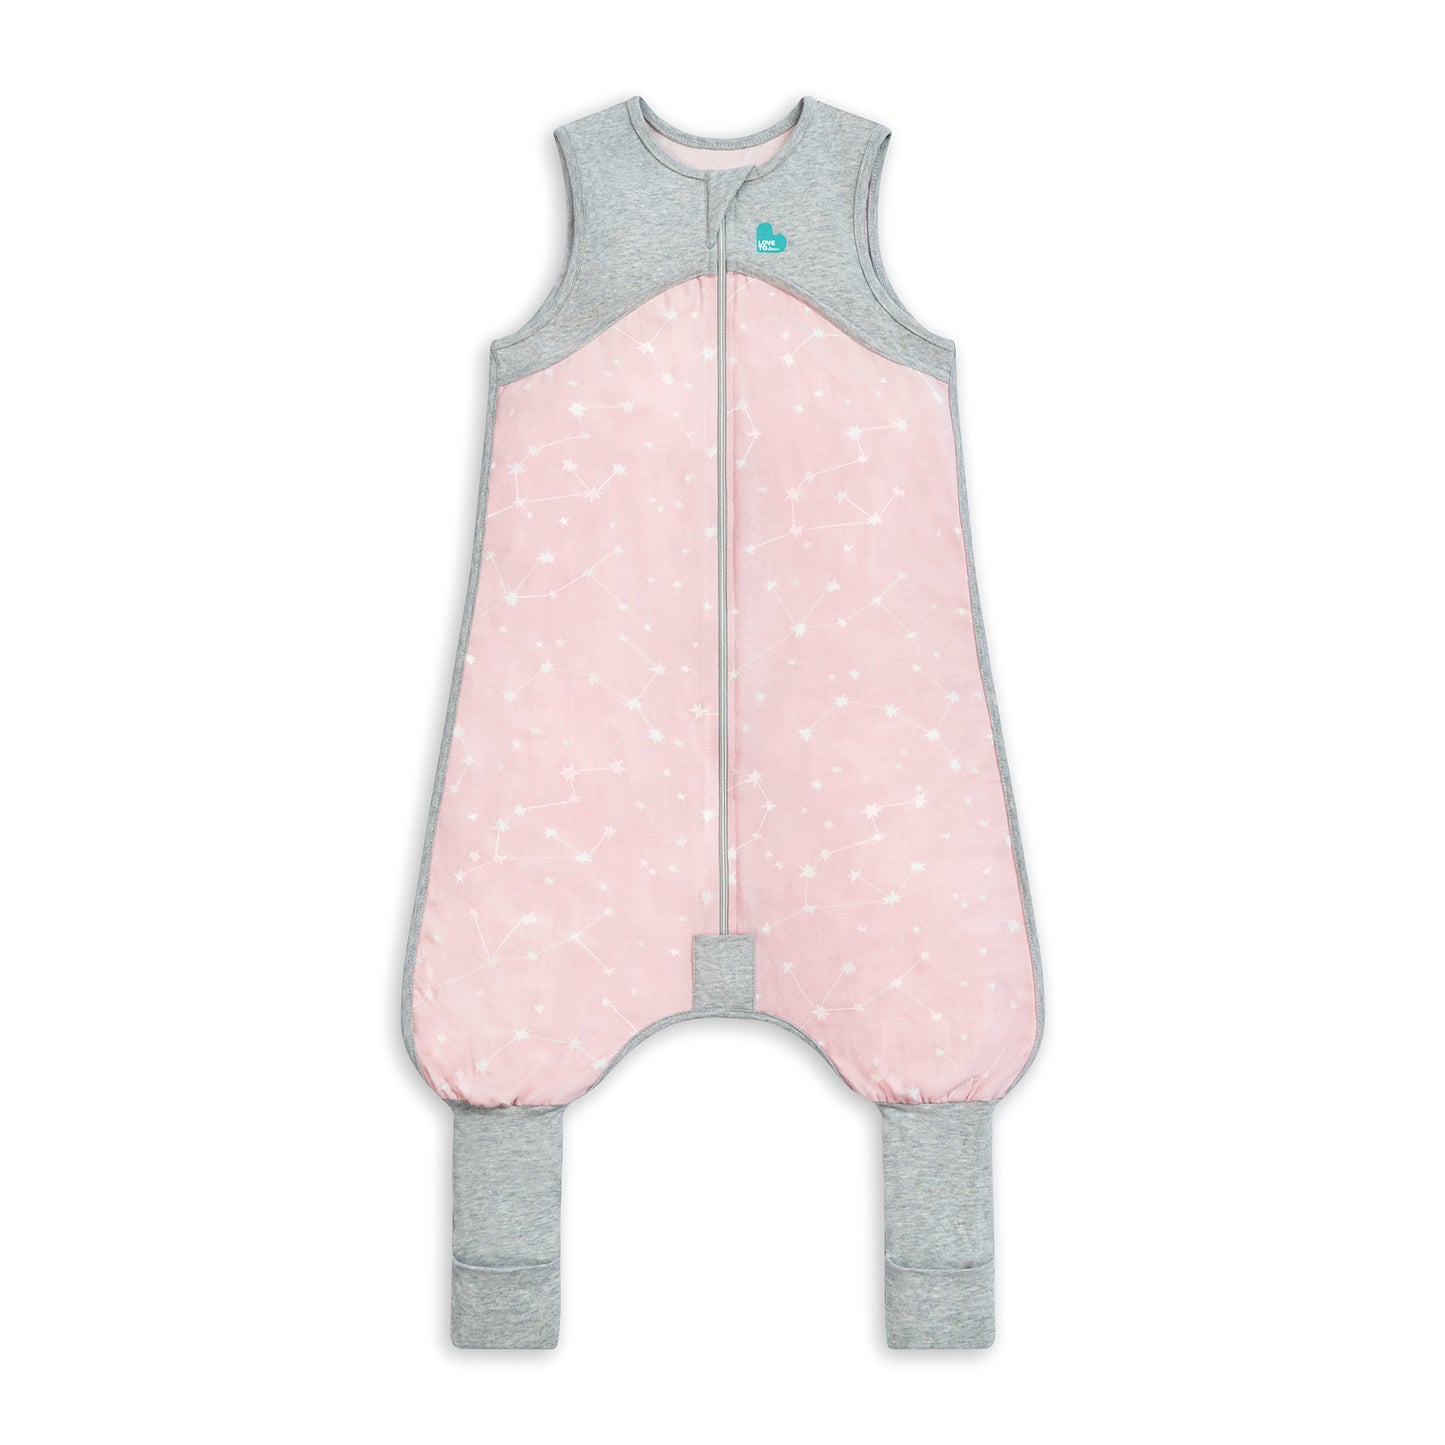 SLEEP SUIT 0.2 TOG STELLAR DUSTY PINK Love To Dream South Africa